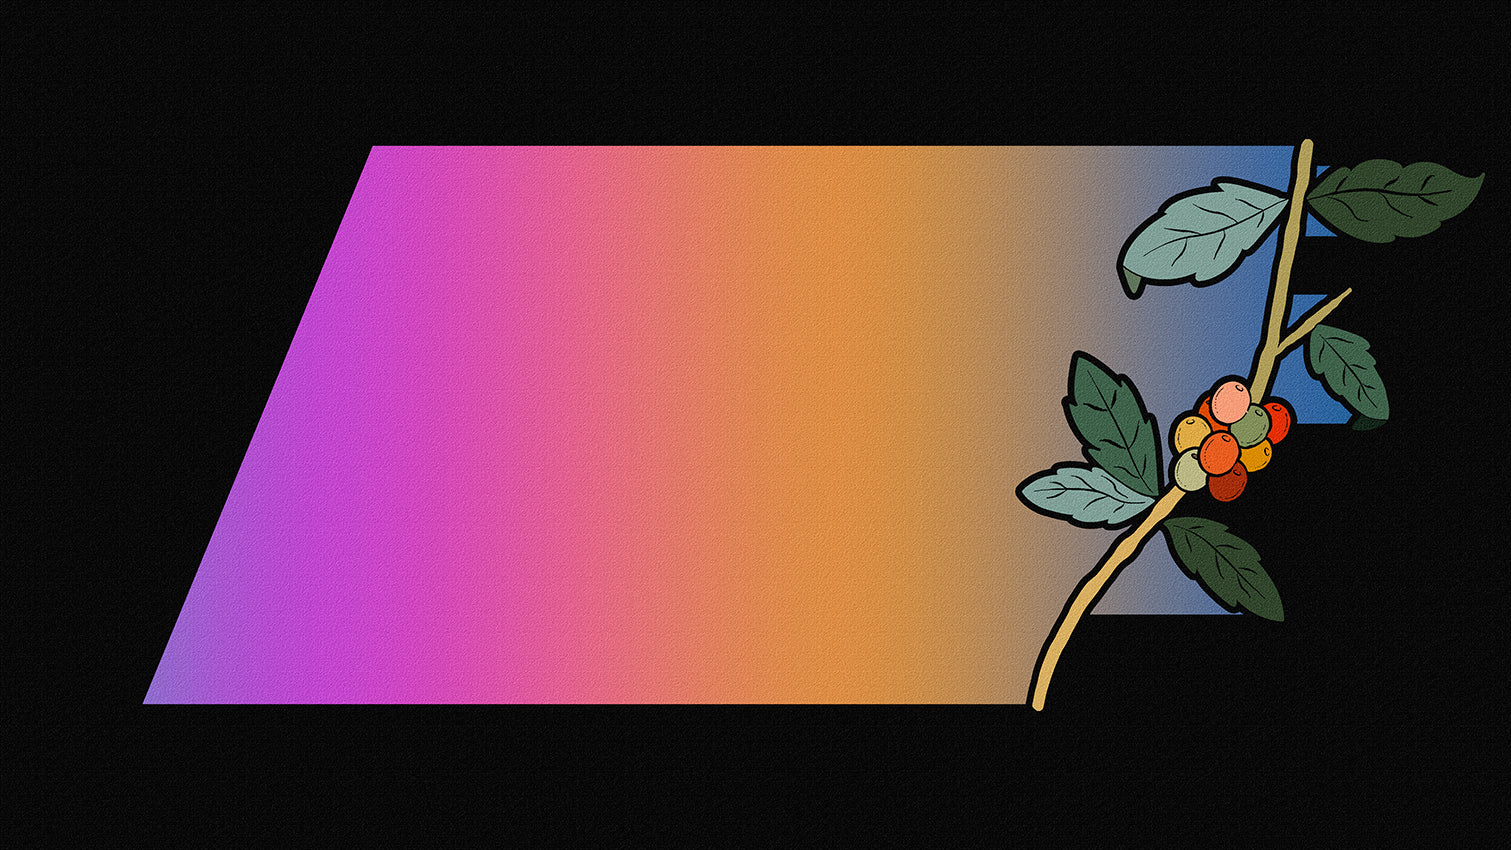 An illustrated coffee plant with a colorful gradient tail.